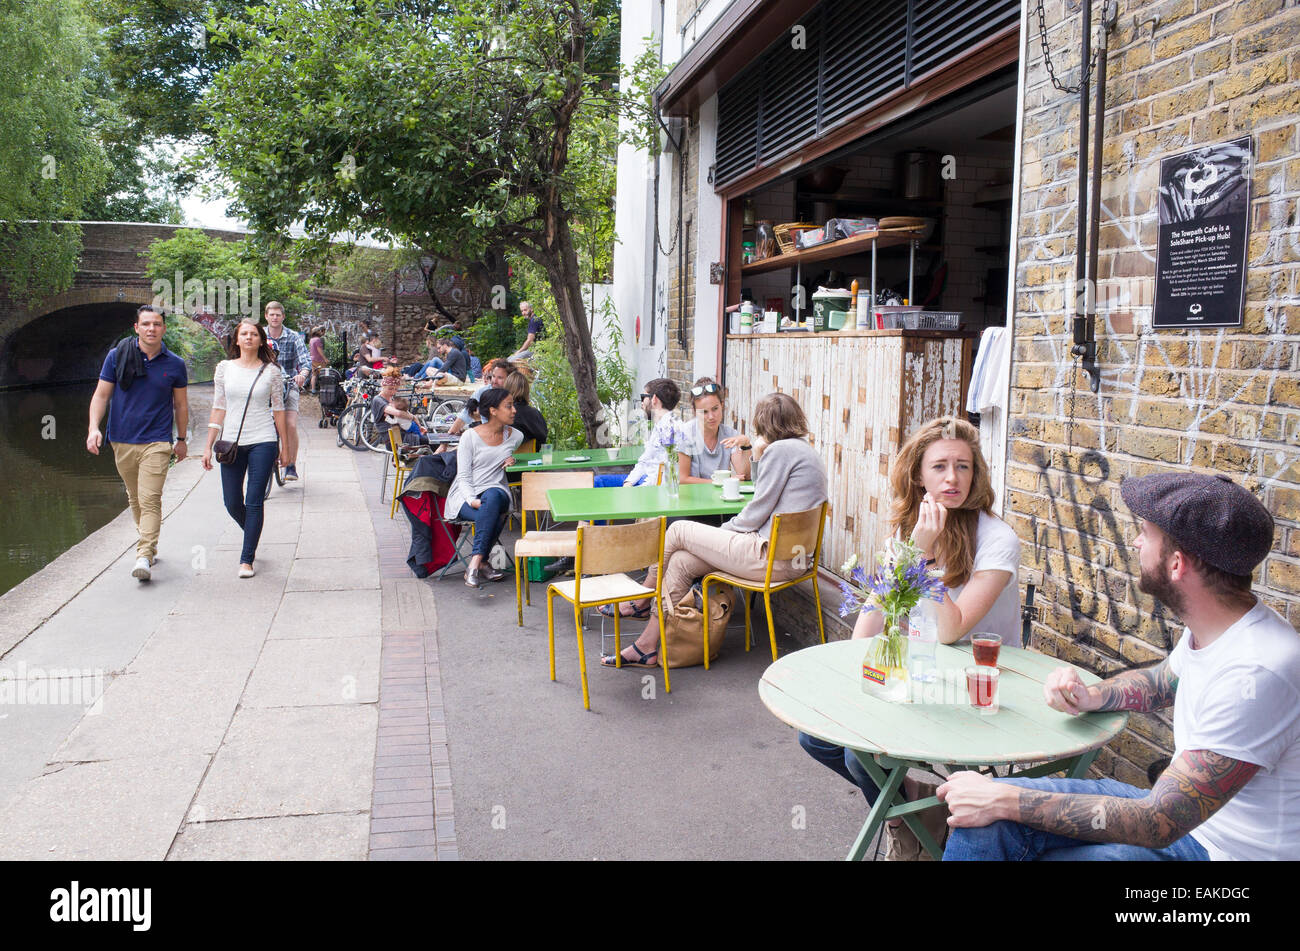 The Towpath Cafe on the Regent's Canal, Shoreditch, Hackney, Londra, Regno Unito Foto Stock